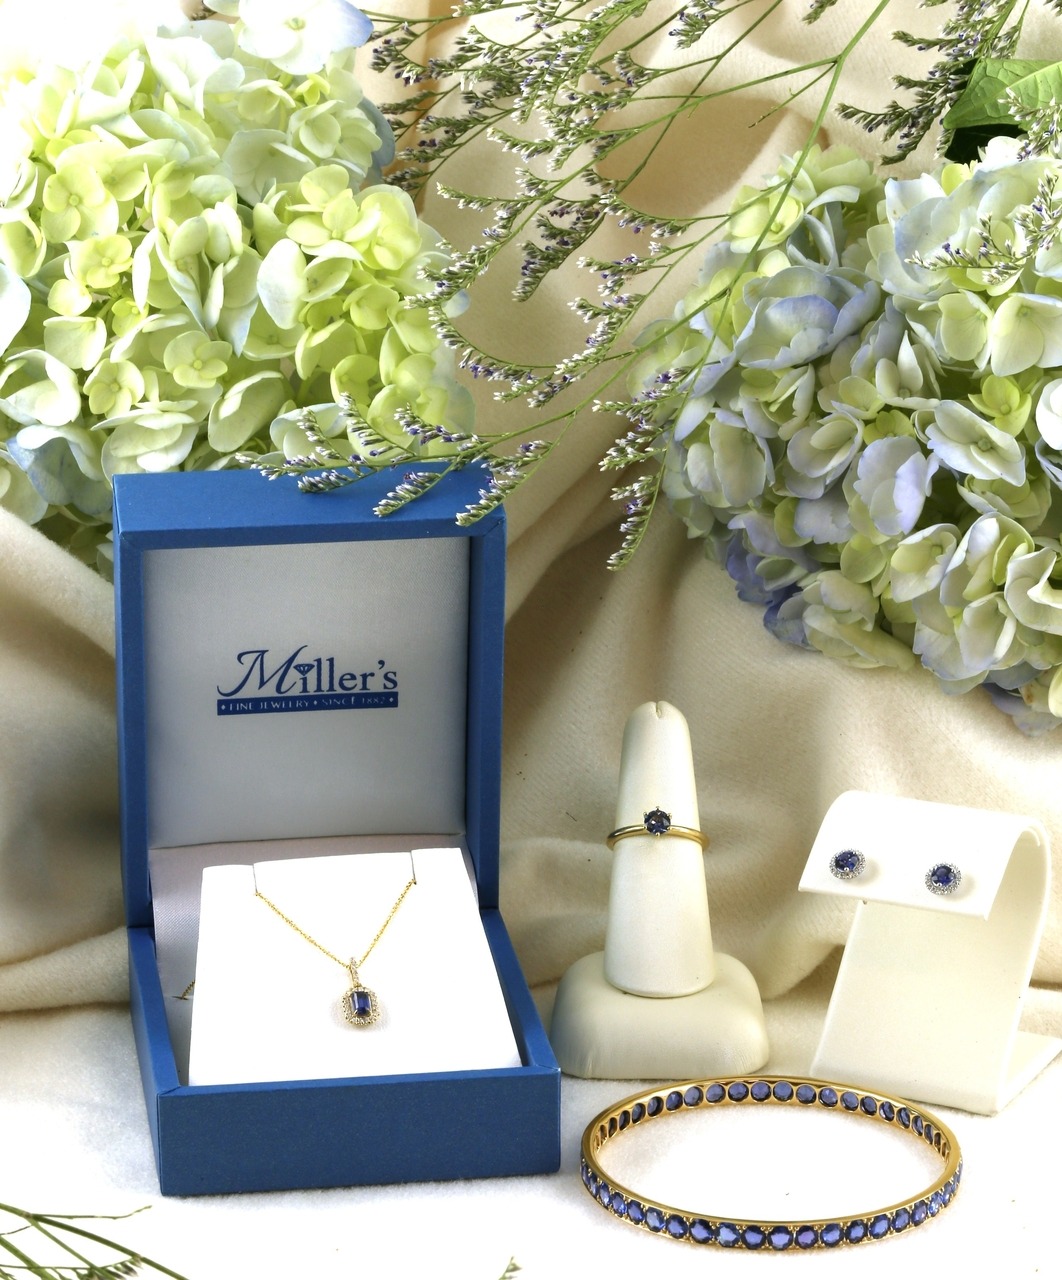 Miller's box and jewelry